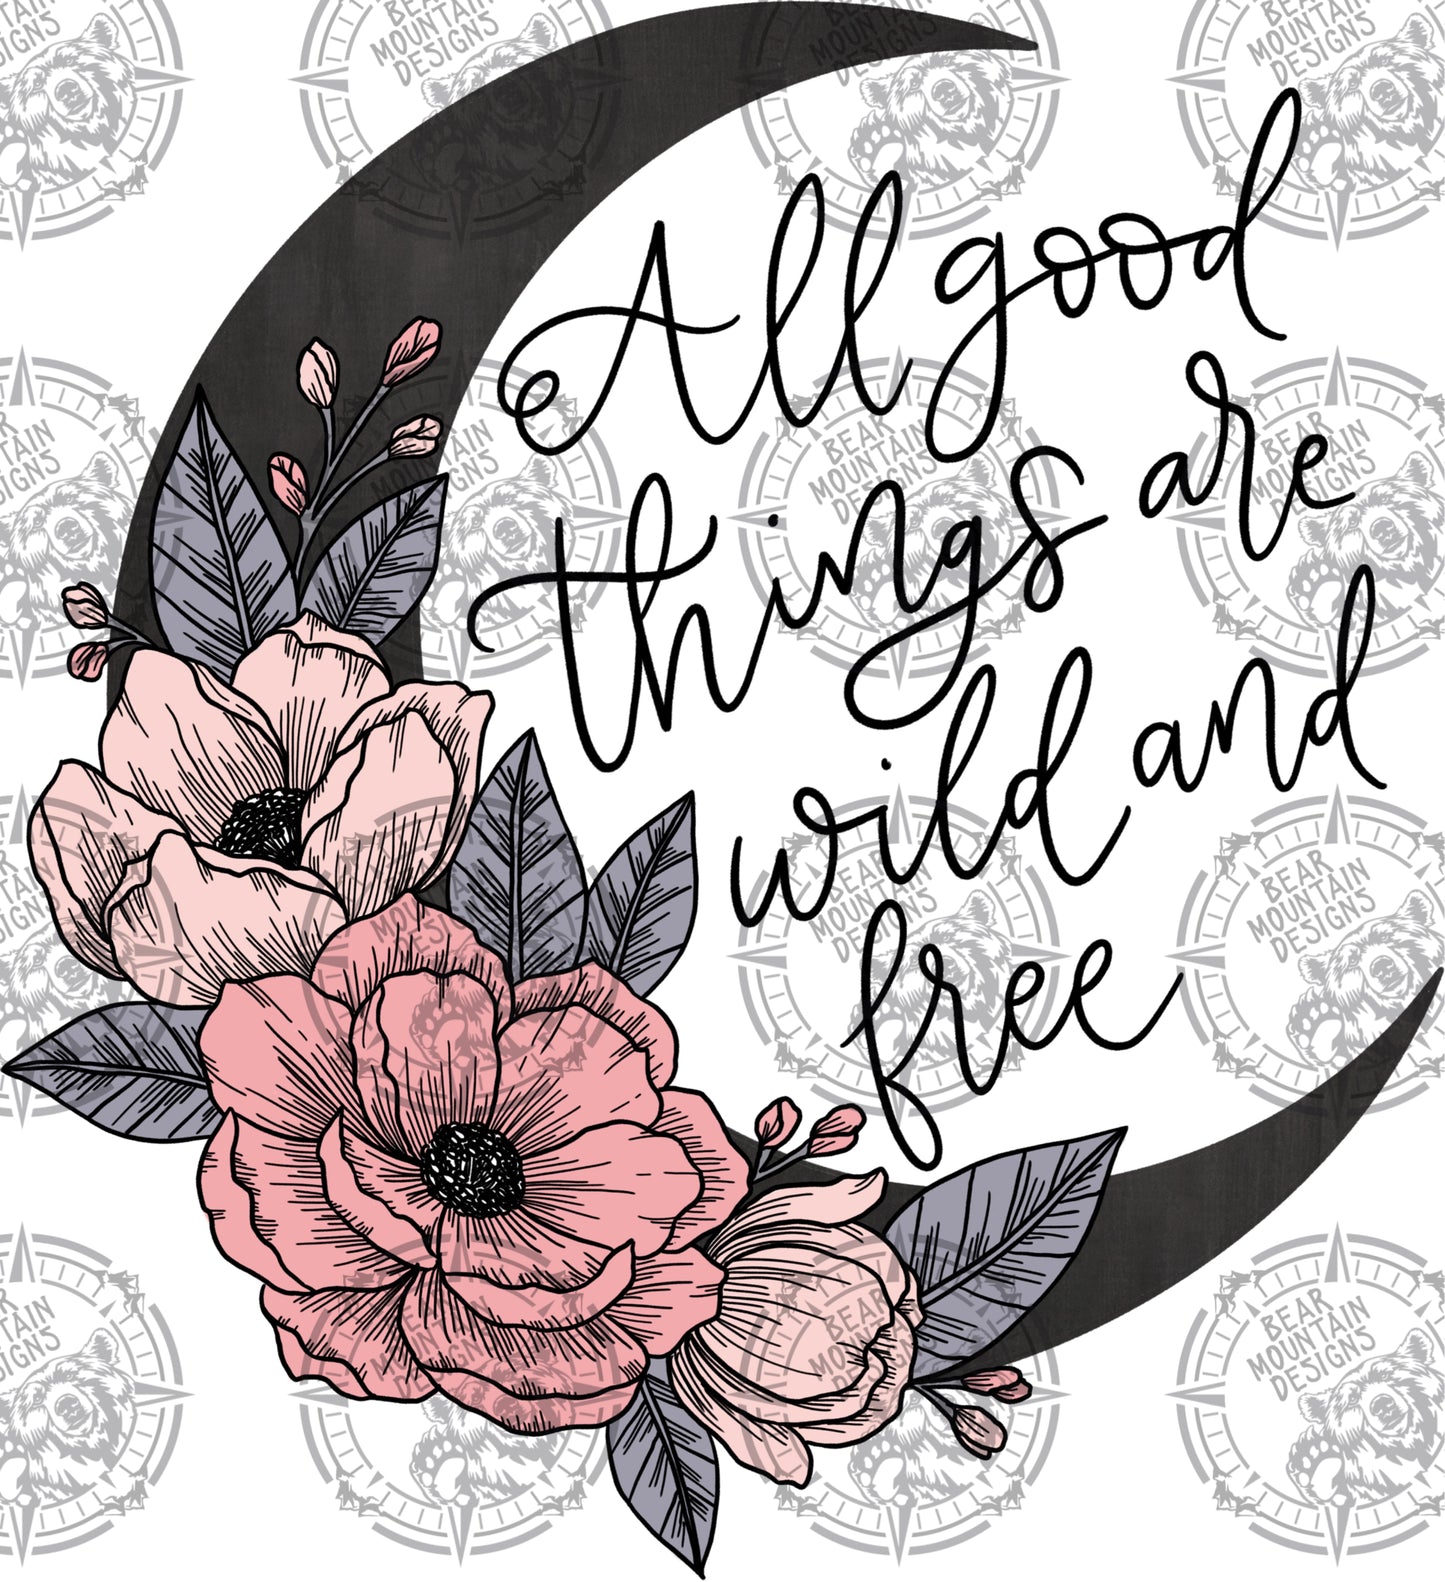 All Good Things Are Wild And Free